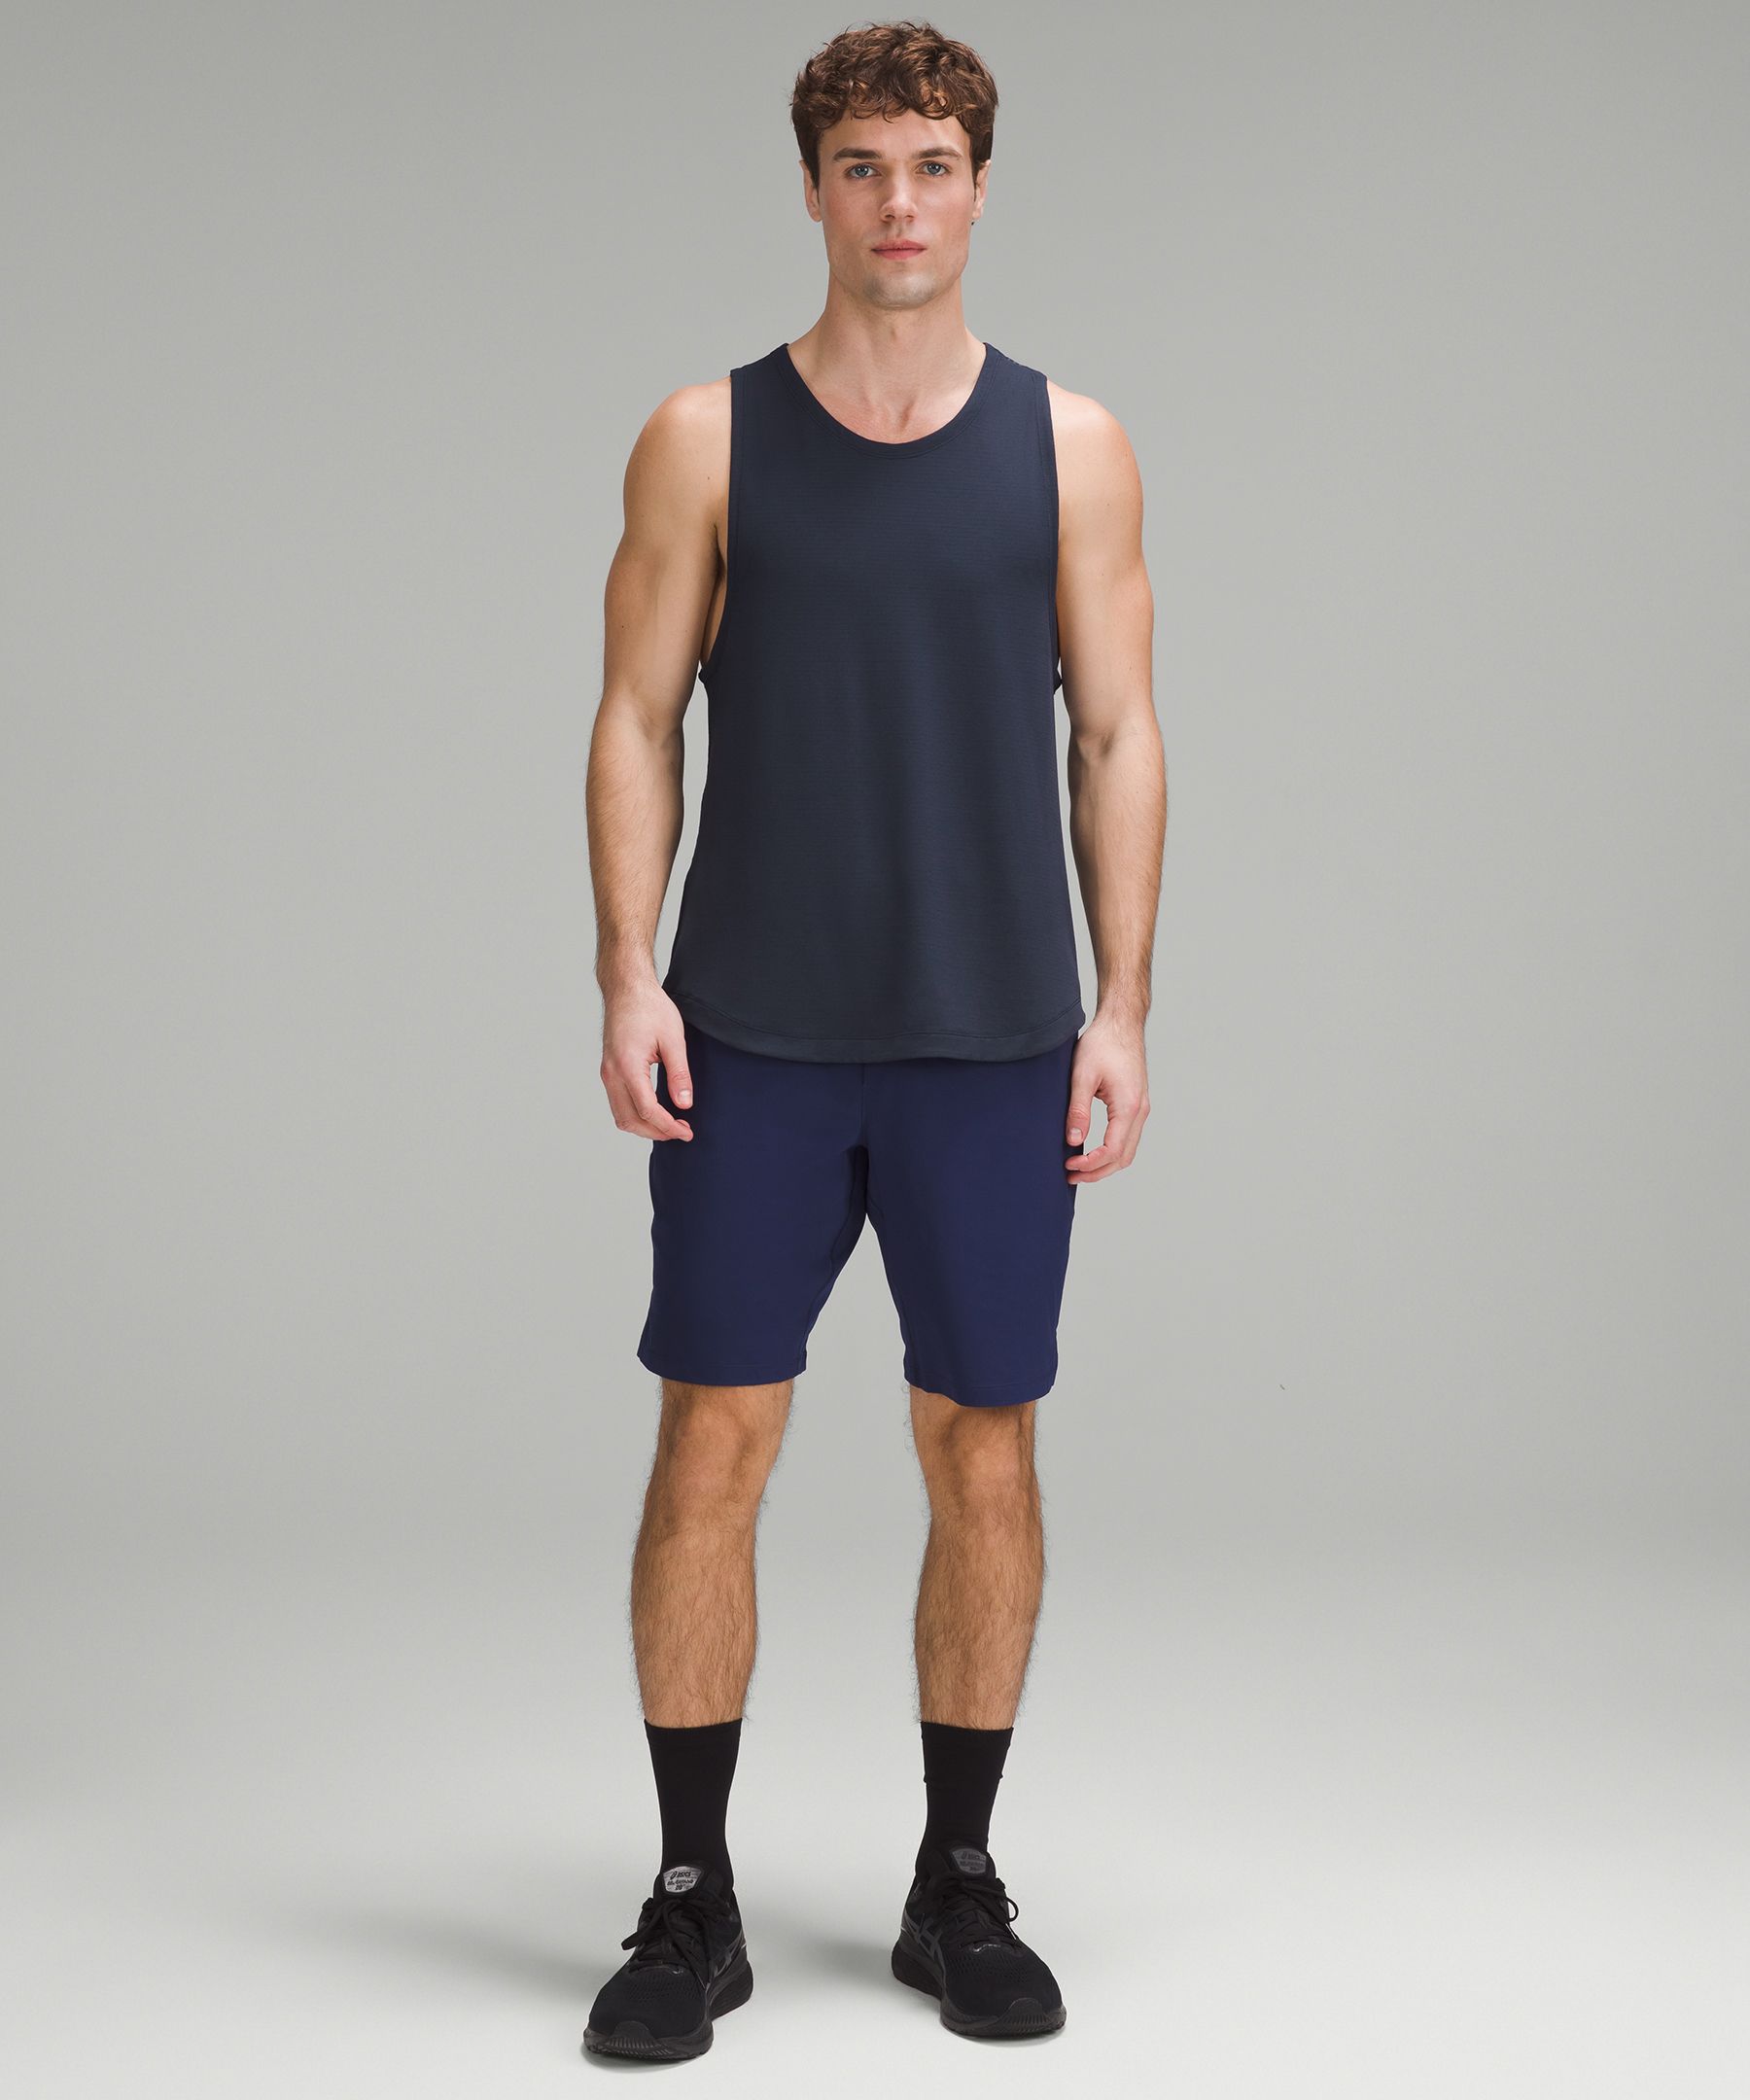 New Version of Train to Be Tank Top 👎🏼👎🏼 : r/lululemon